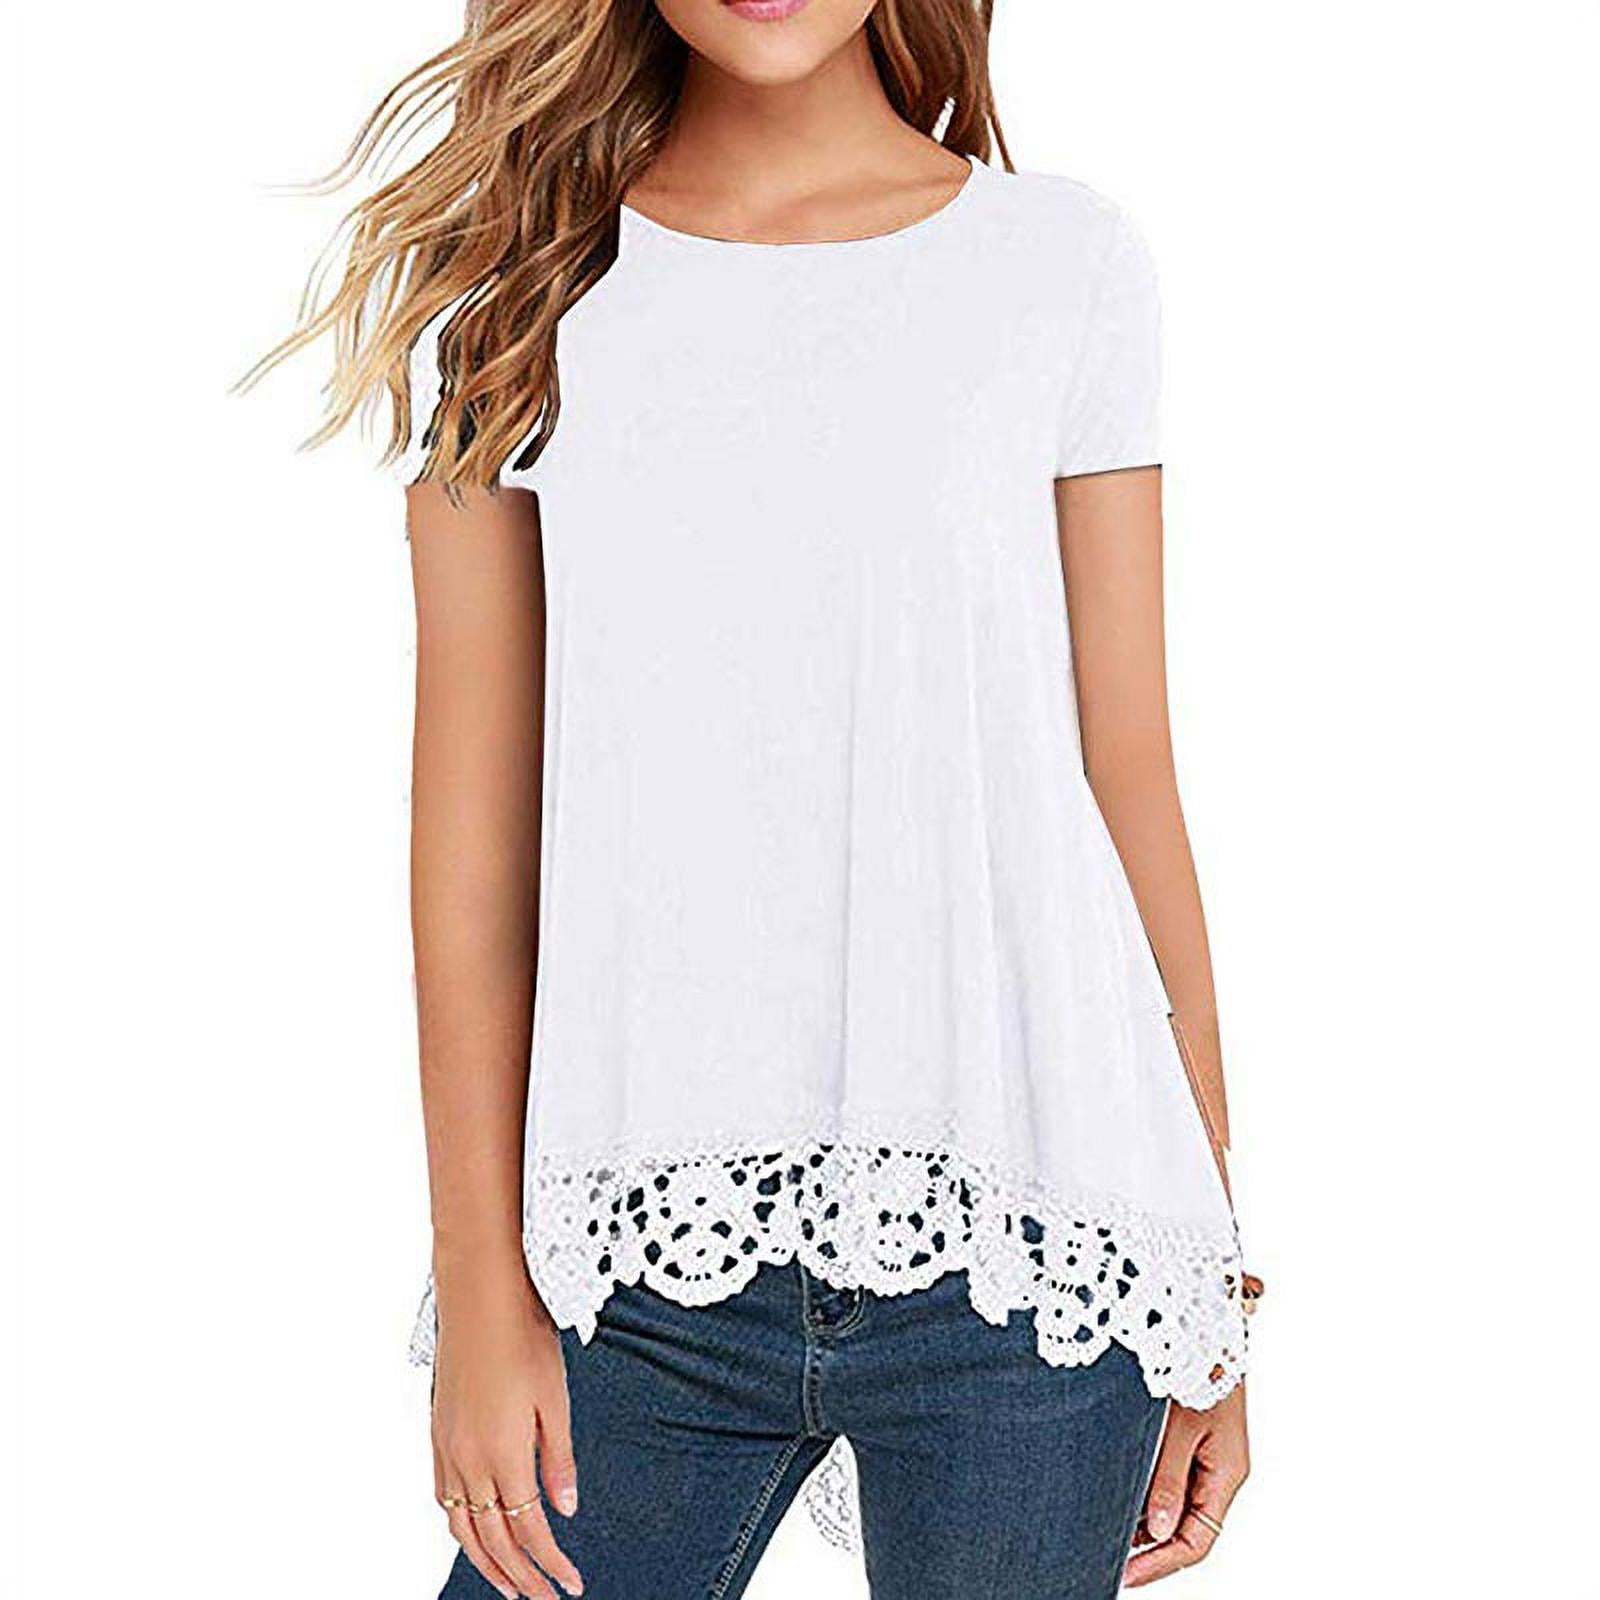 Womens Shirts Short Sleeve Lace Cat Print Lace-up Loose Casual Tunic Tops Blouse T-Shirt for Women Ladies Teen Girls 